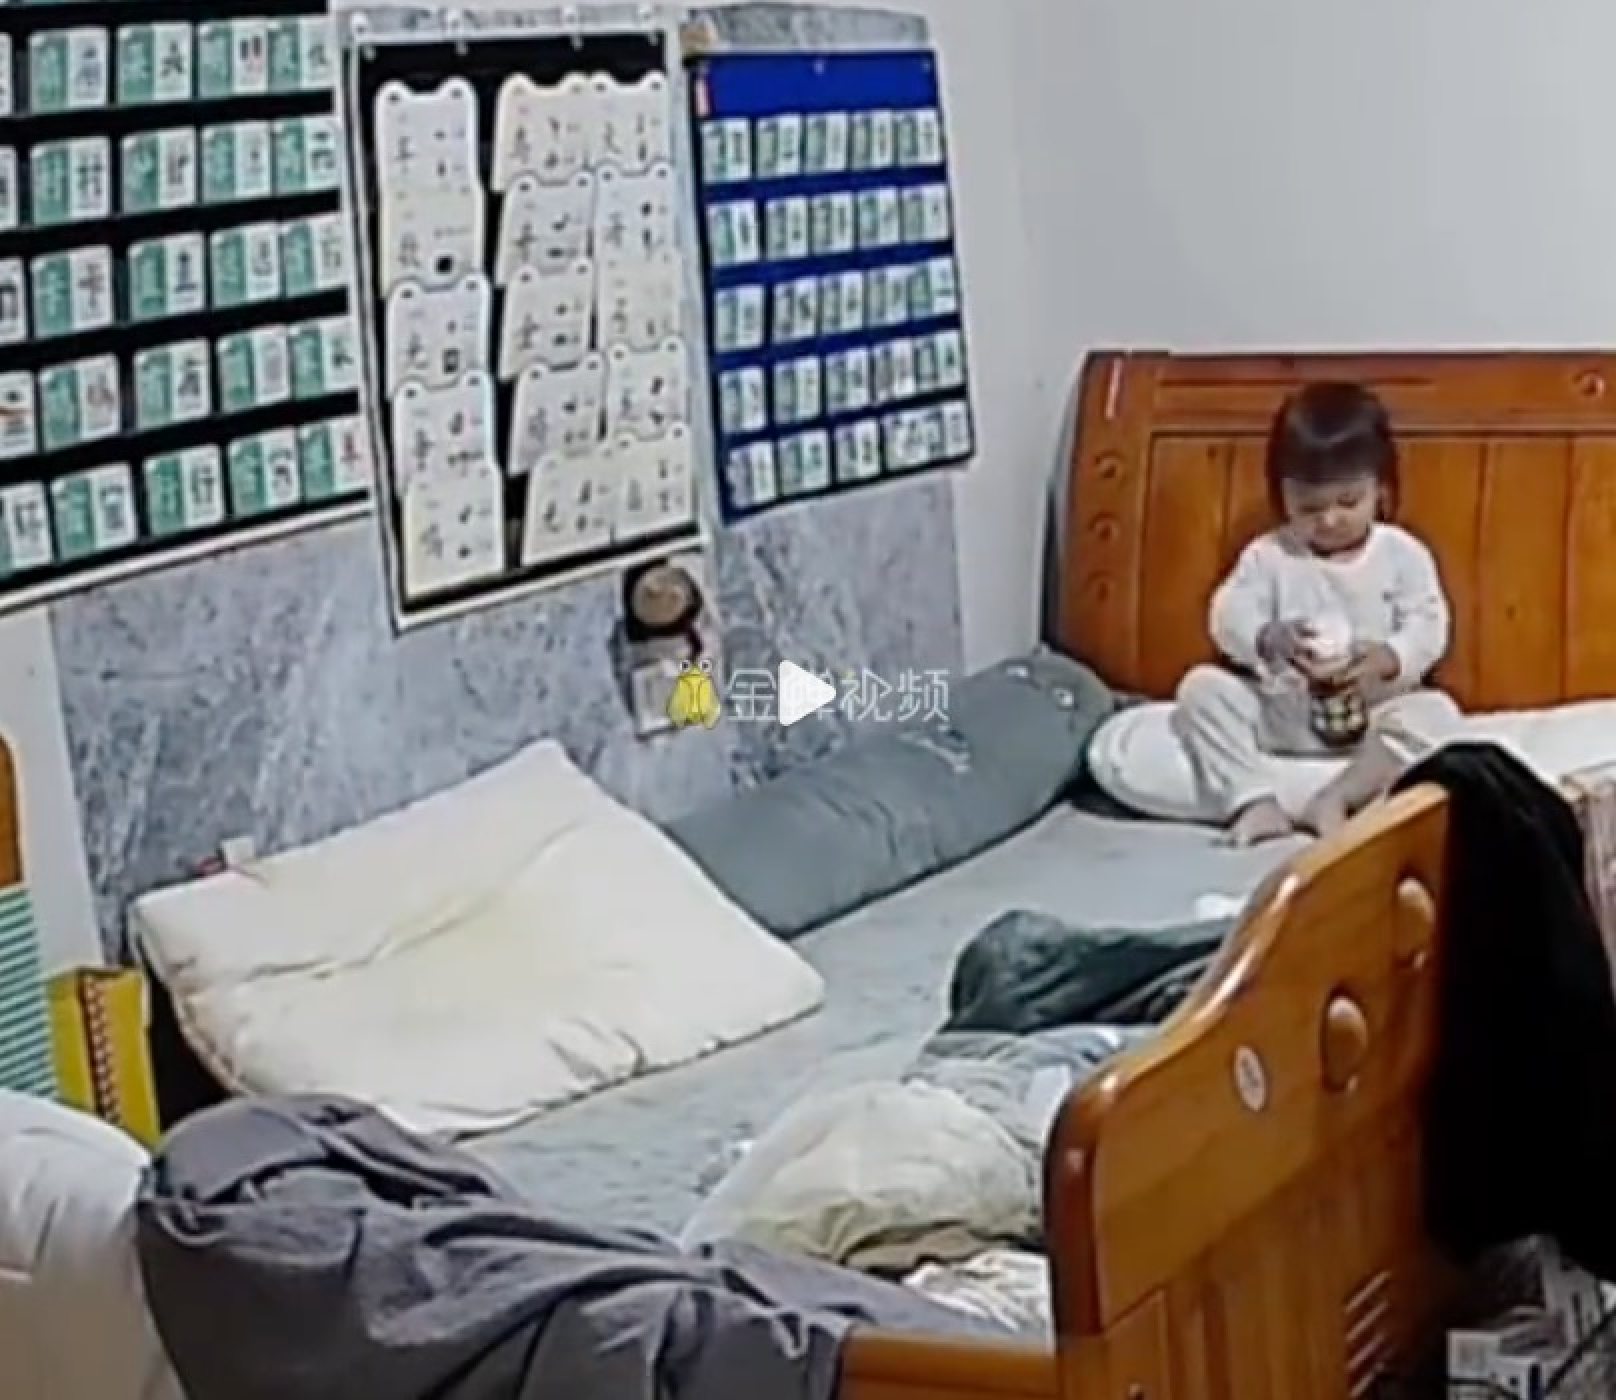 Surveillance camera footage shows the little girl sitting on a bed drinking from a bottle of milk. Photo: Douyin